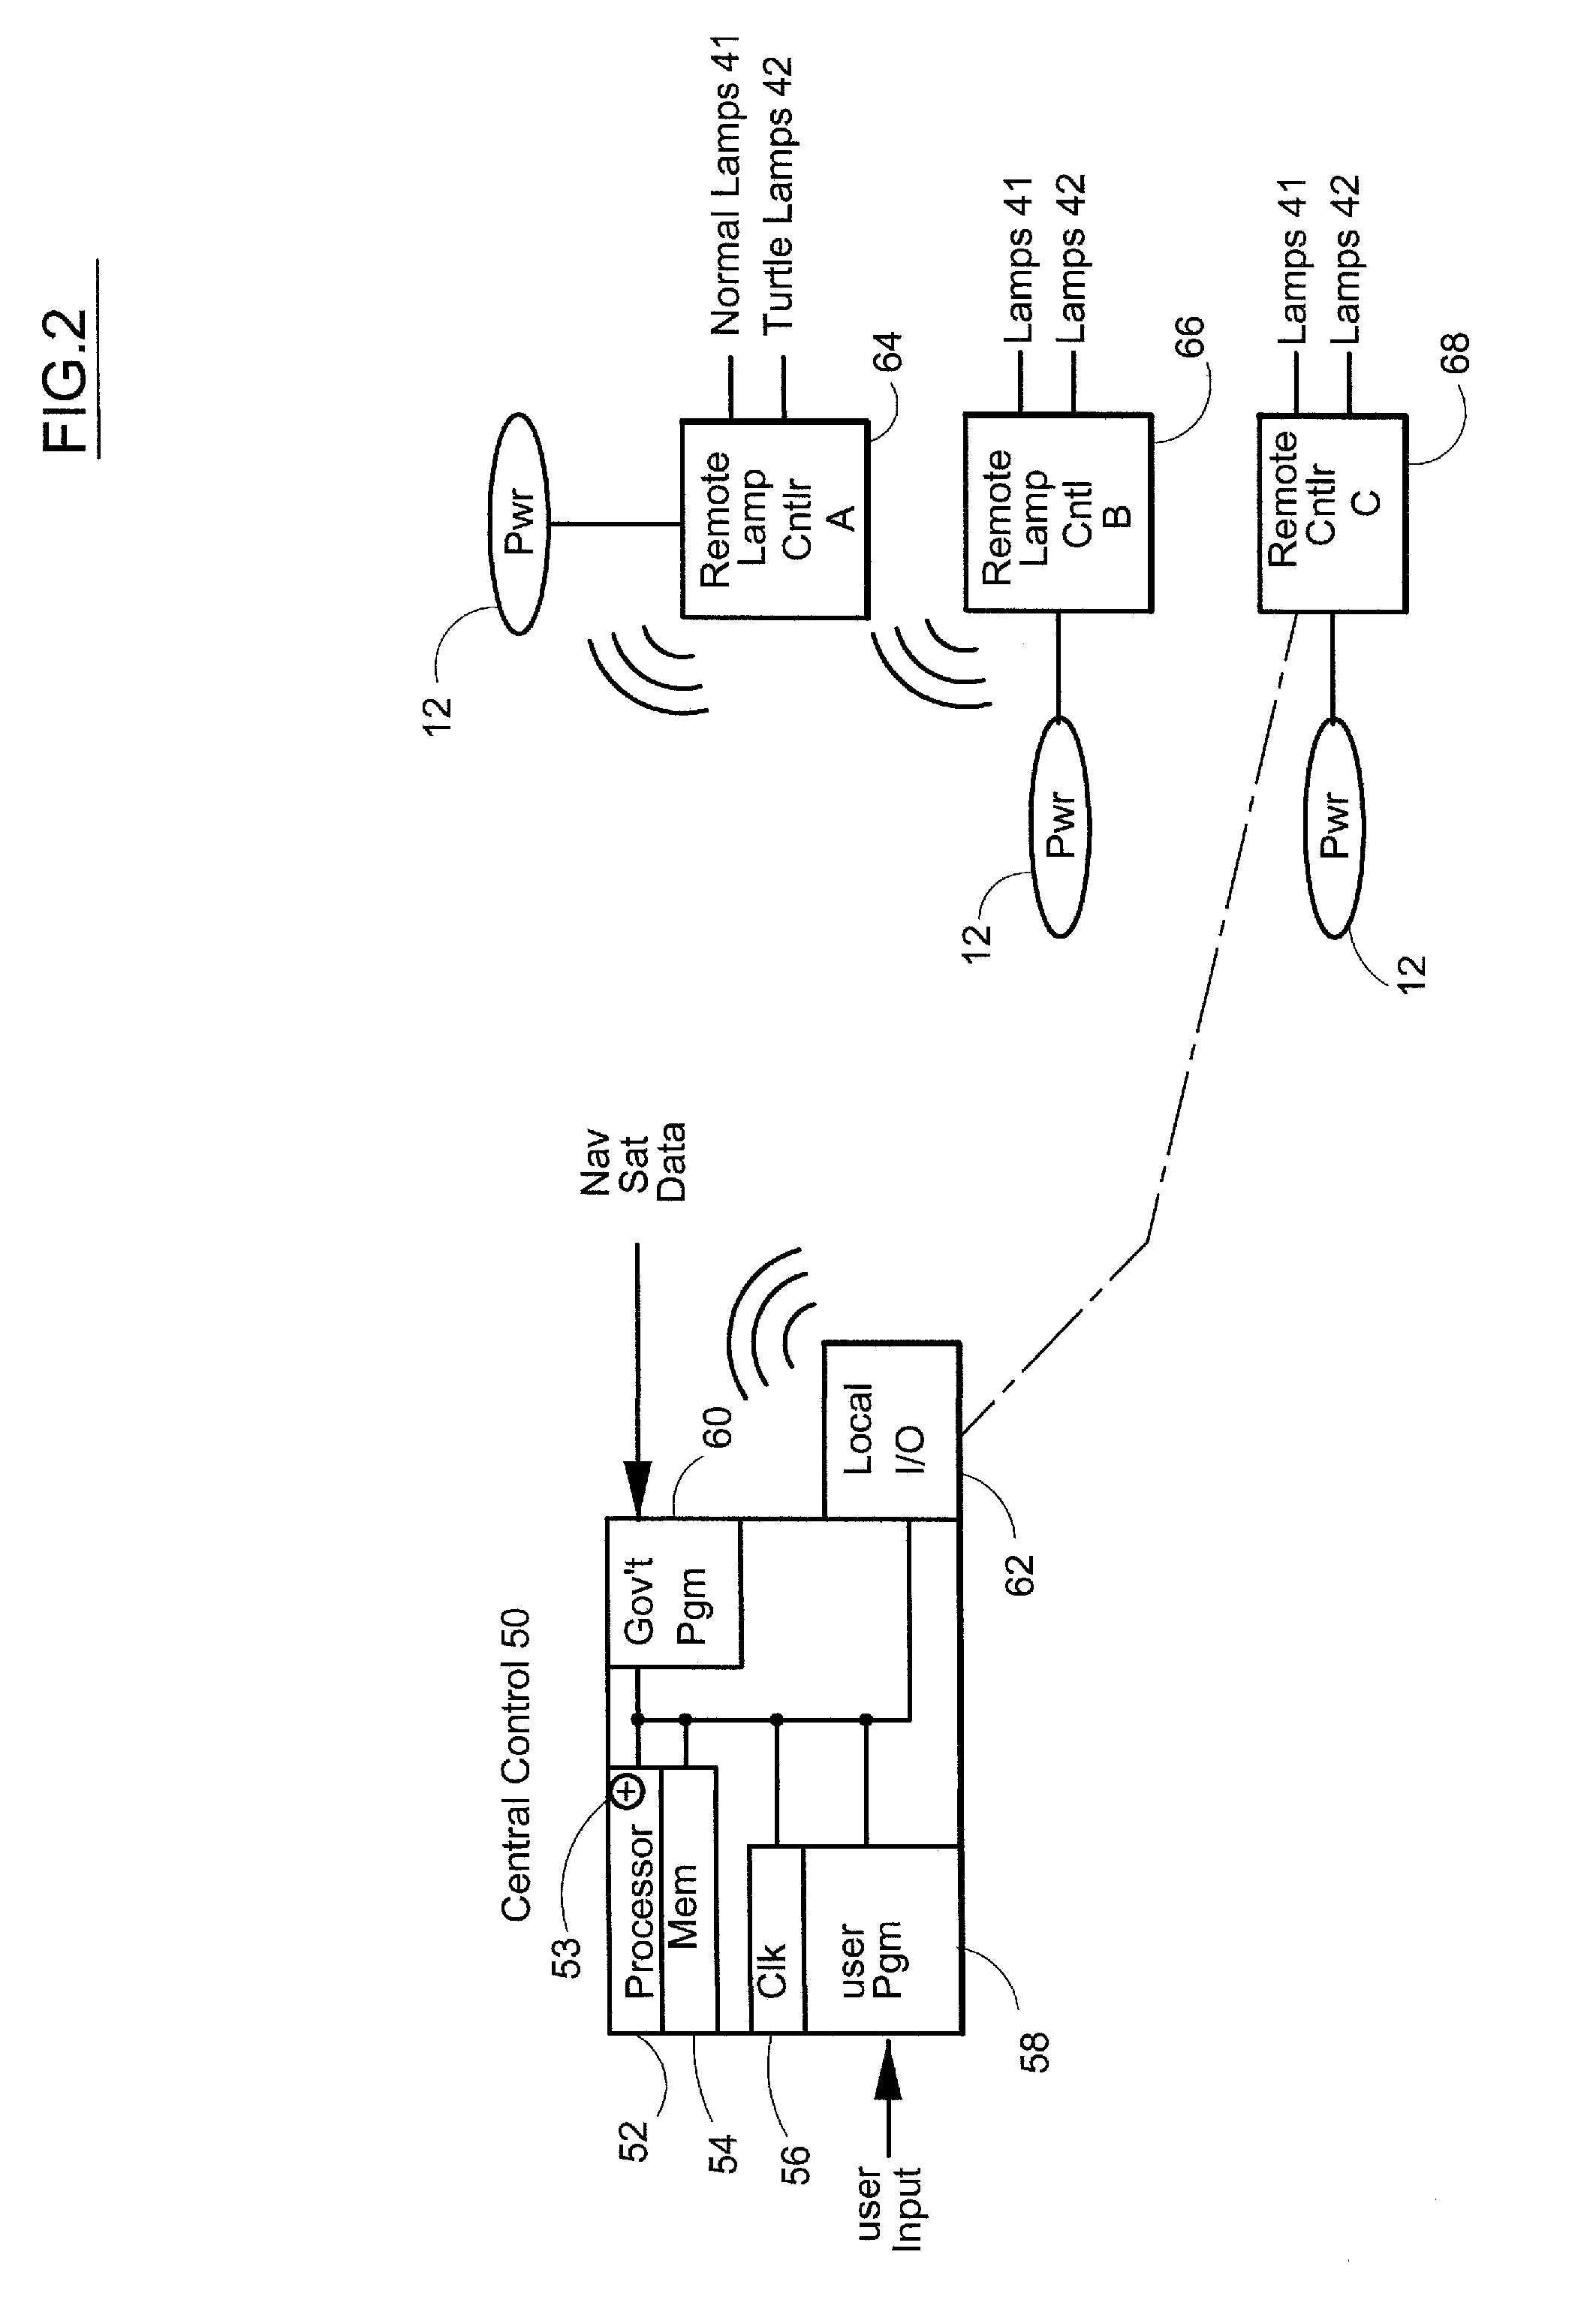 Sea turtle light control system and method